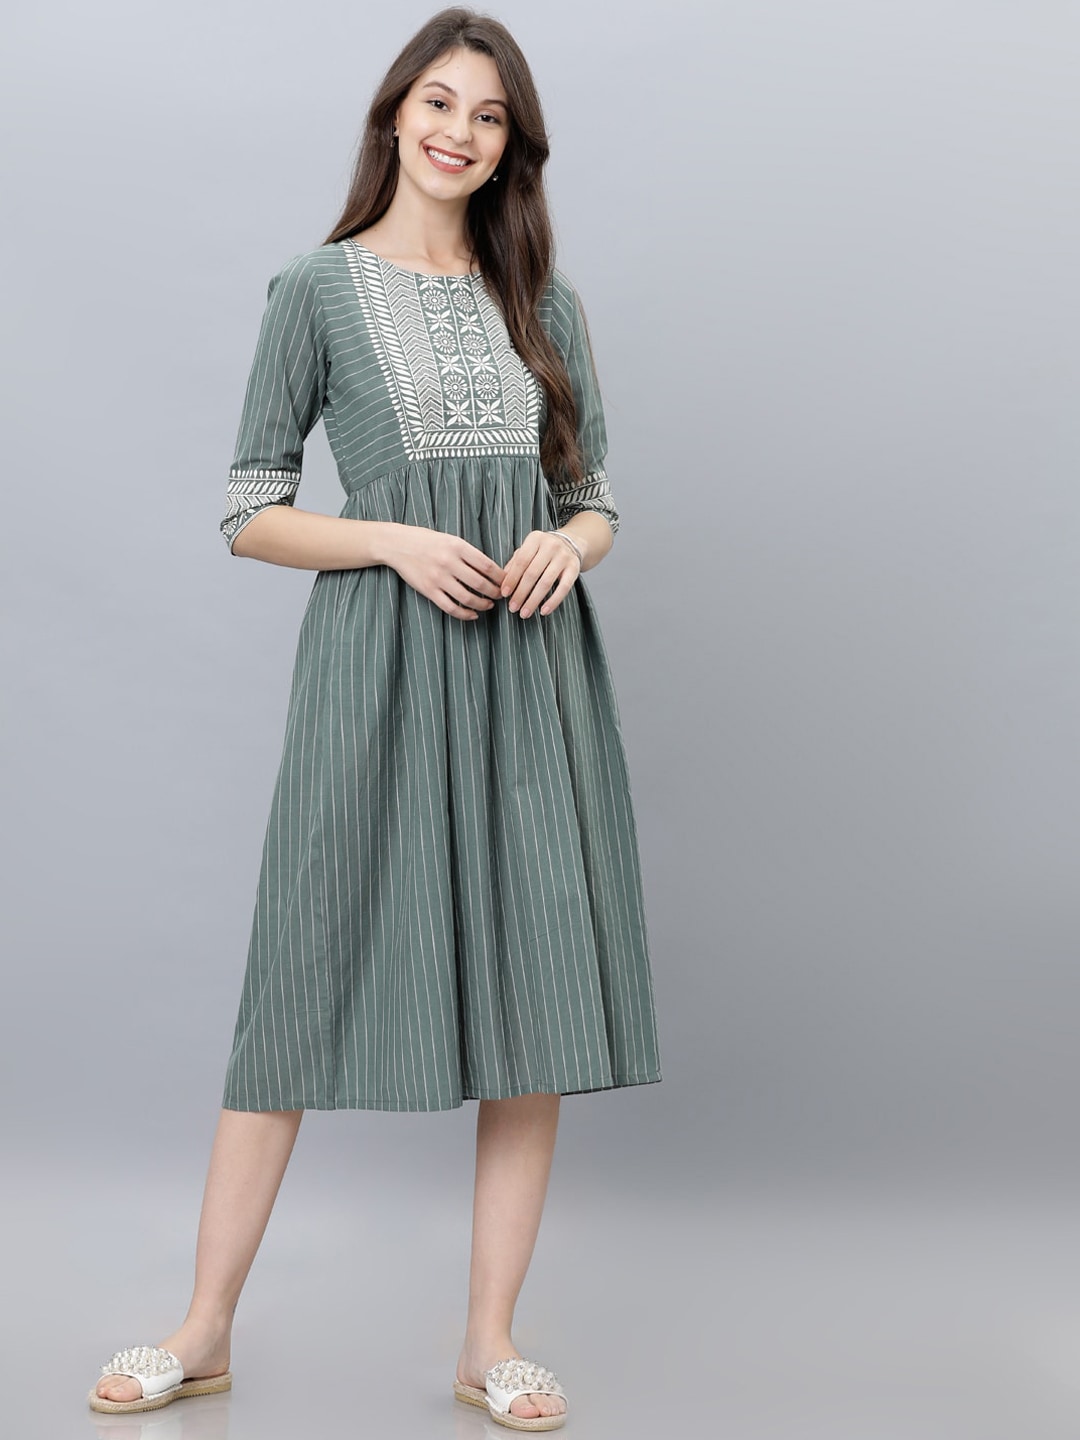 Vishudh Green Striped Fit and Flare Dress Price in India